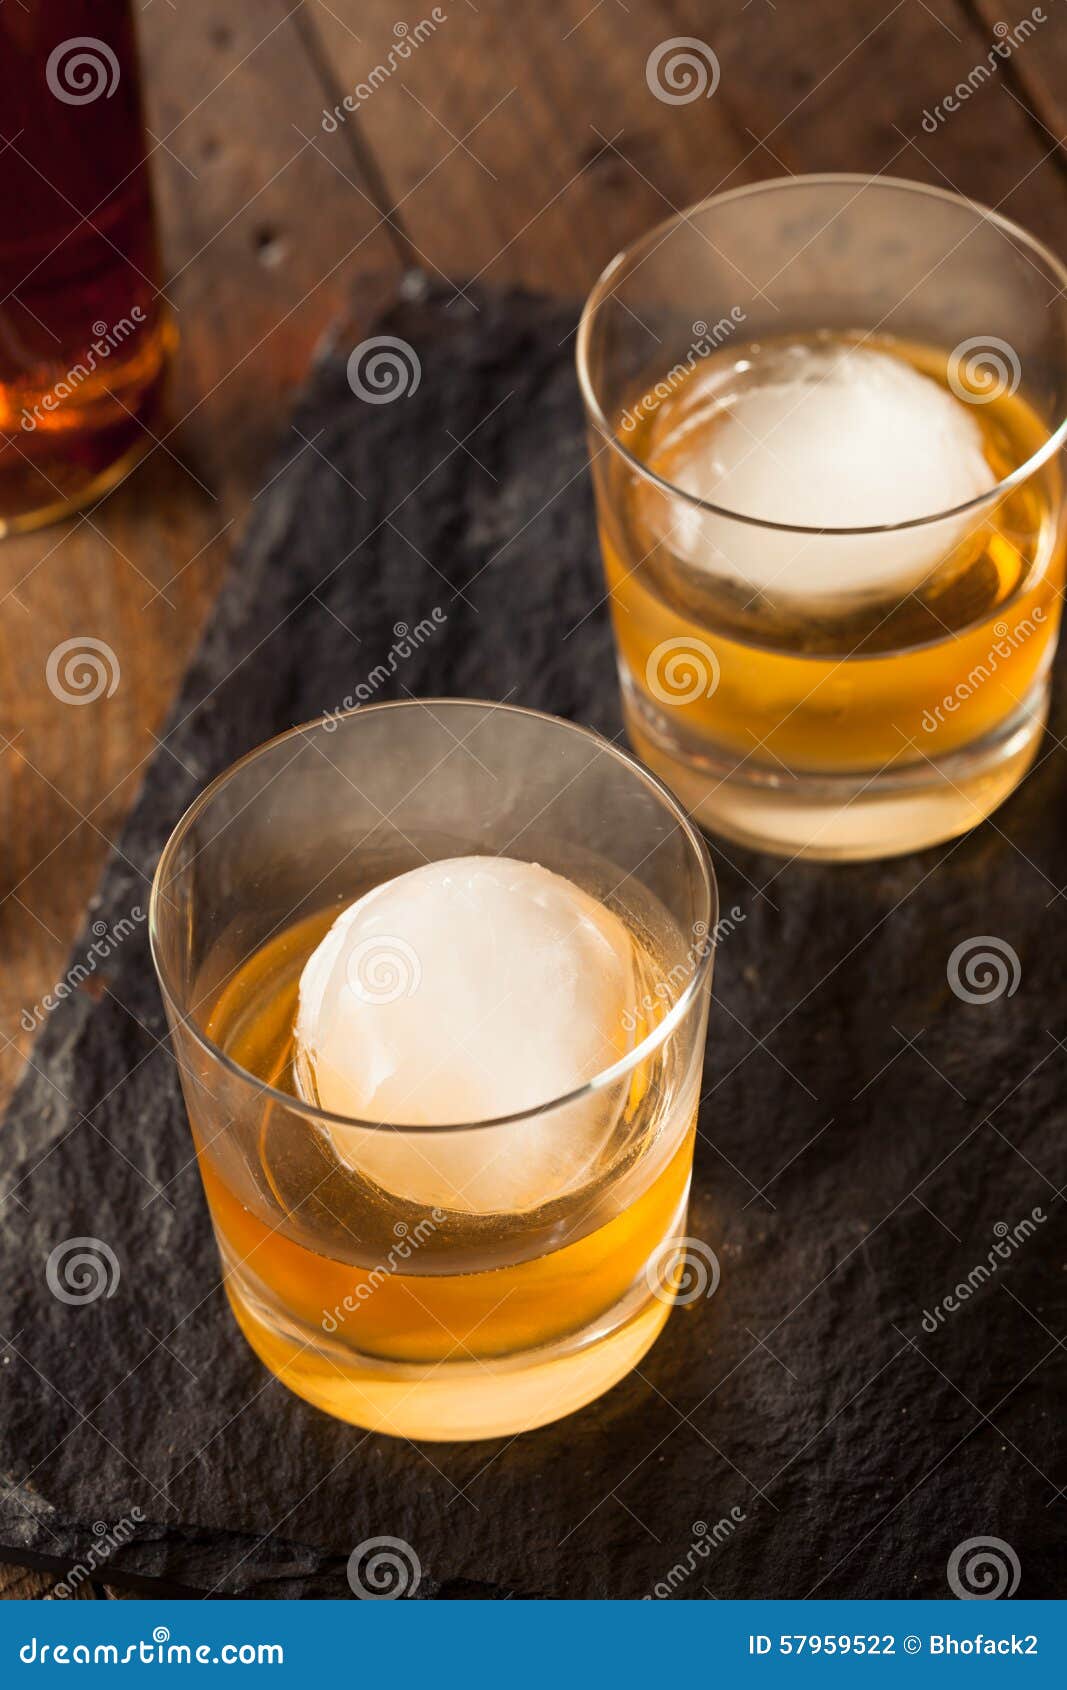 https://thumbs.dreamstime.com/z/bourbon-whiskey-sphere-ice-cube-ready-to-drink-57959522.jpg